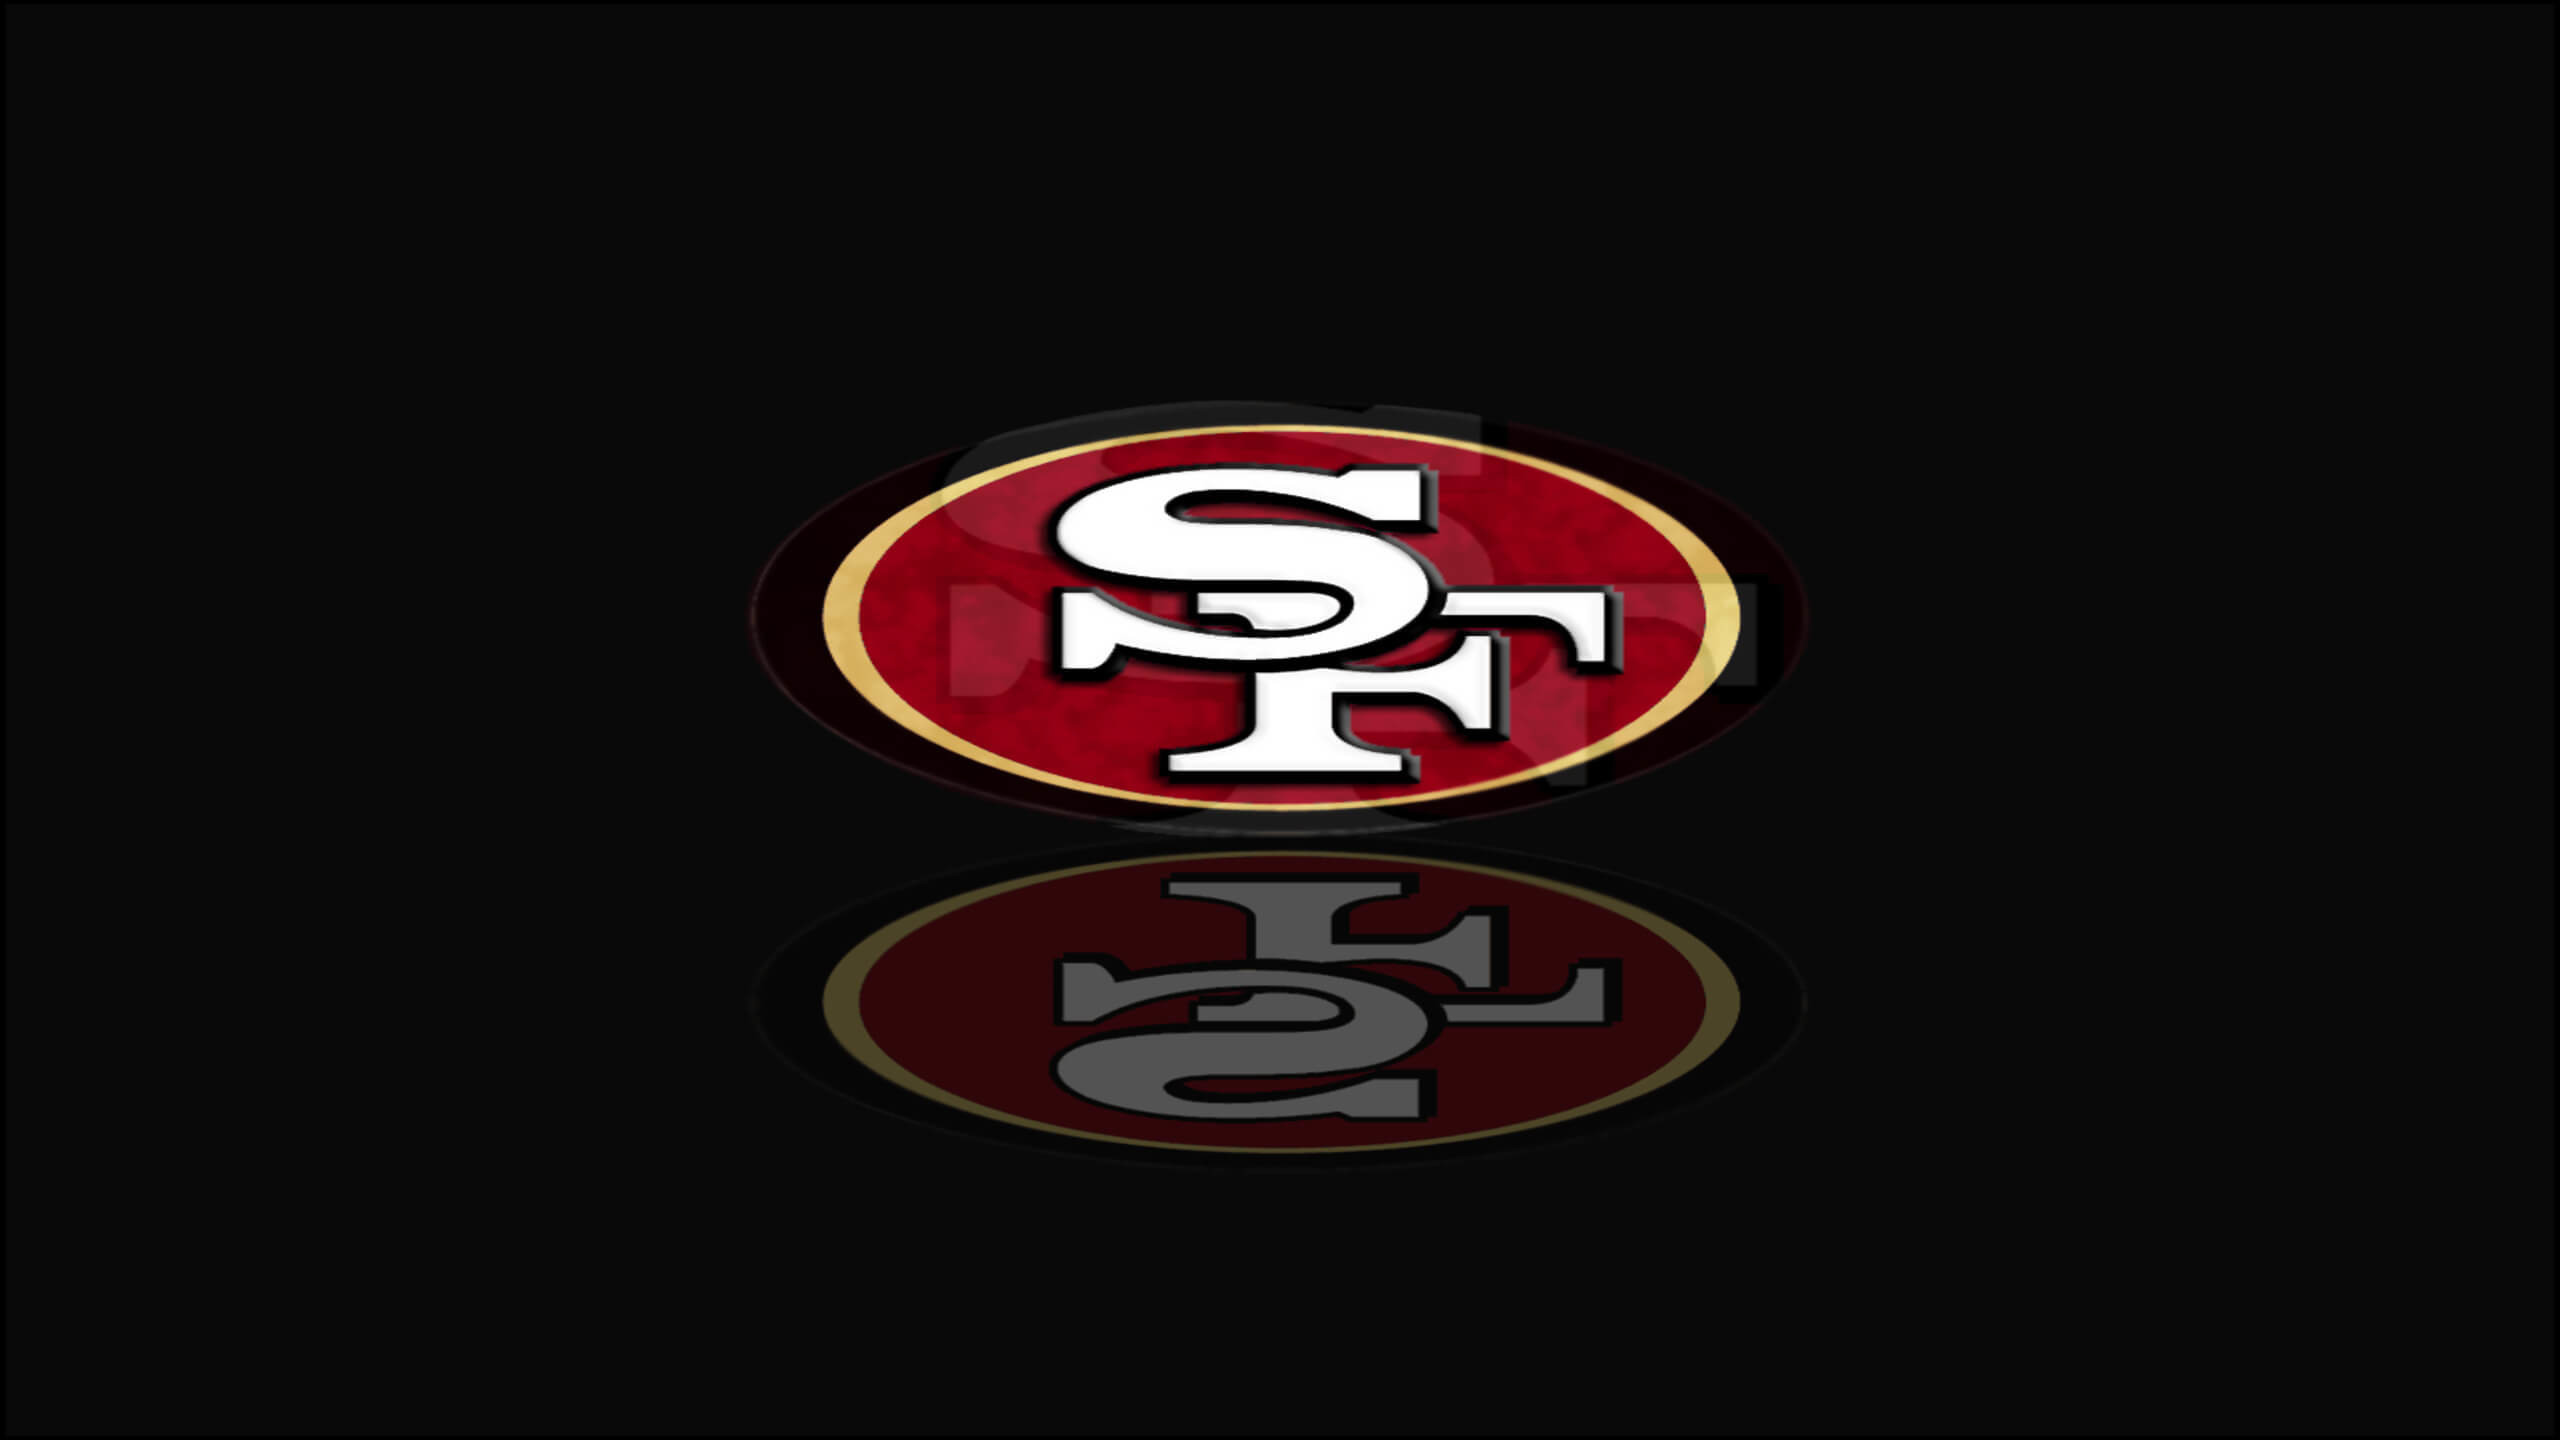 Details 81+ free 49ers wallpaper - in.cdgdbentre